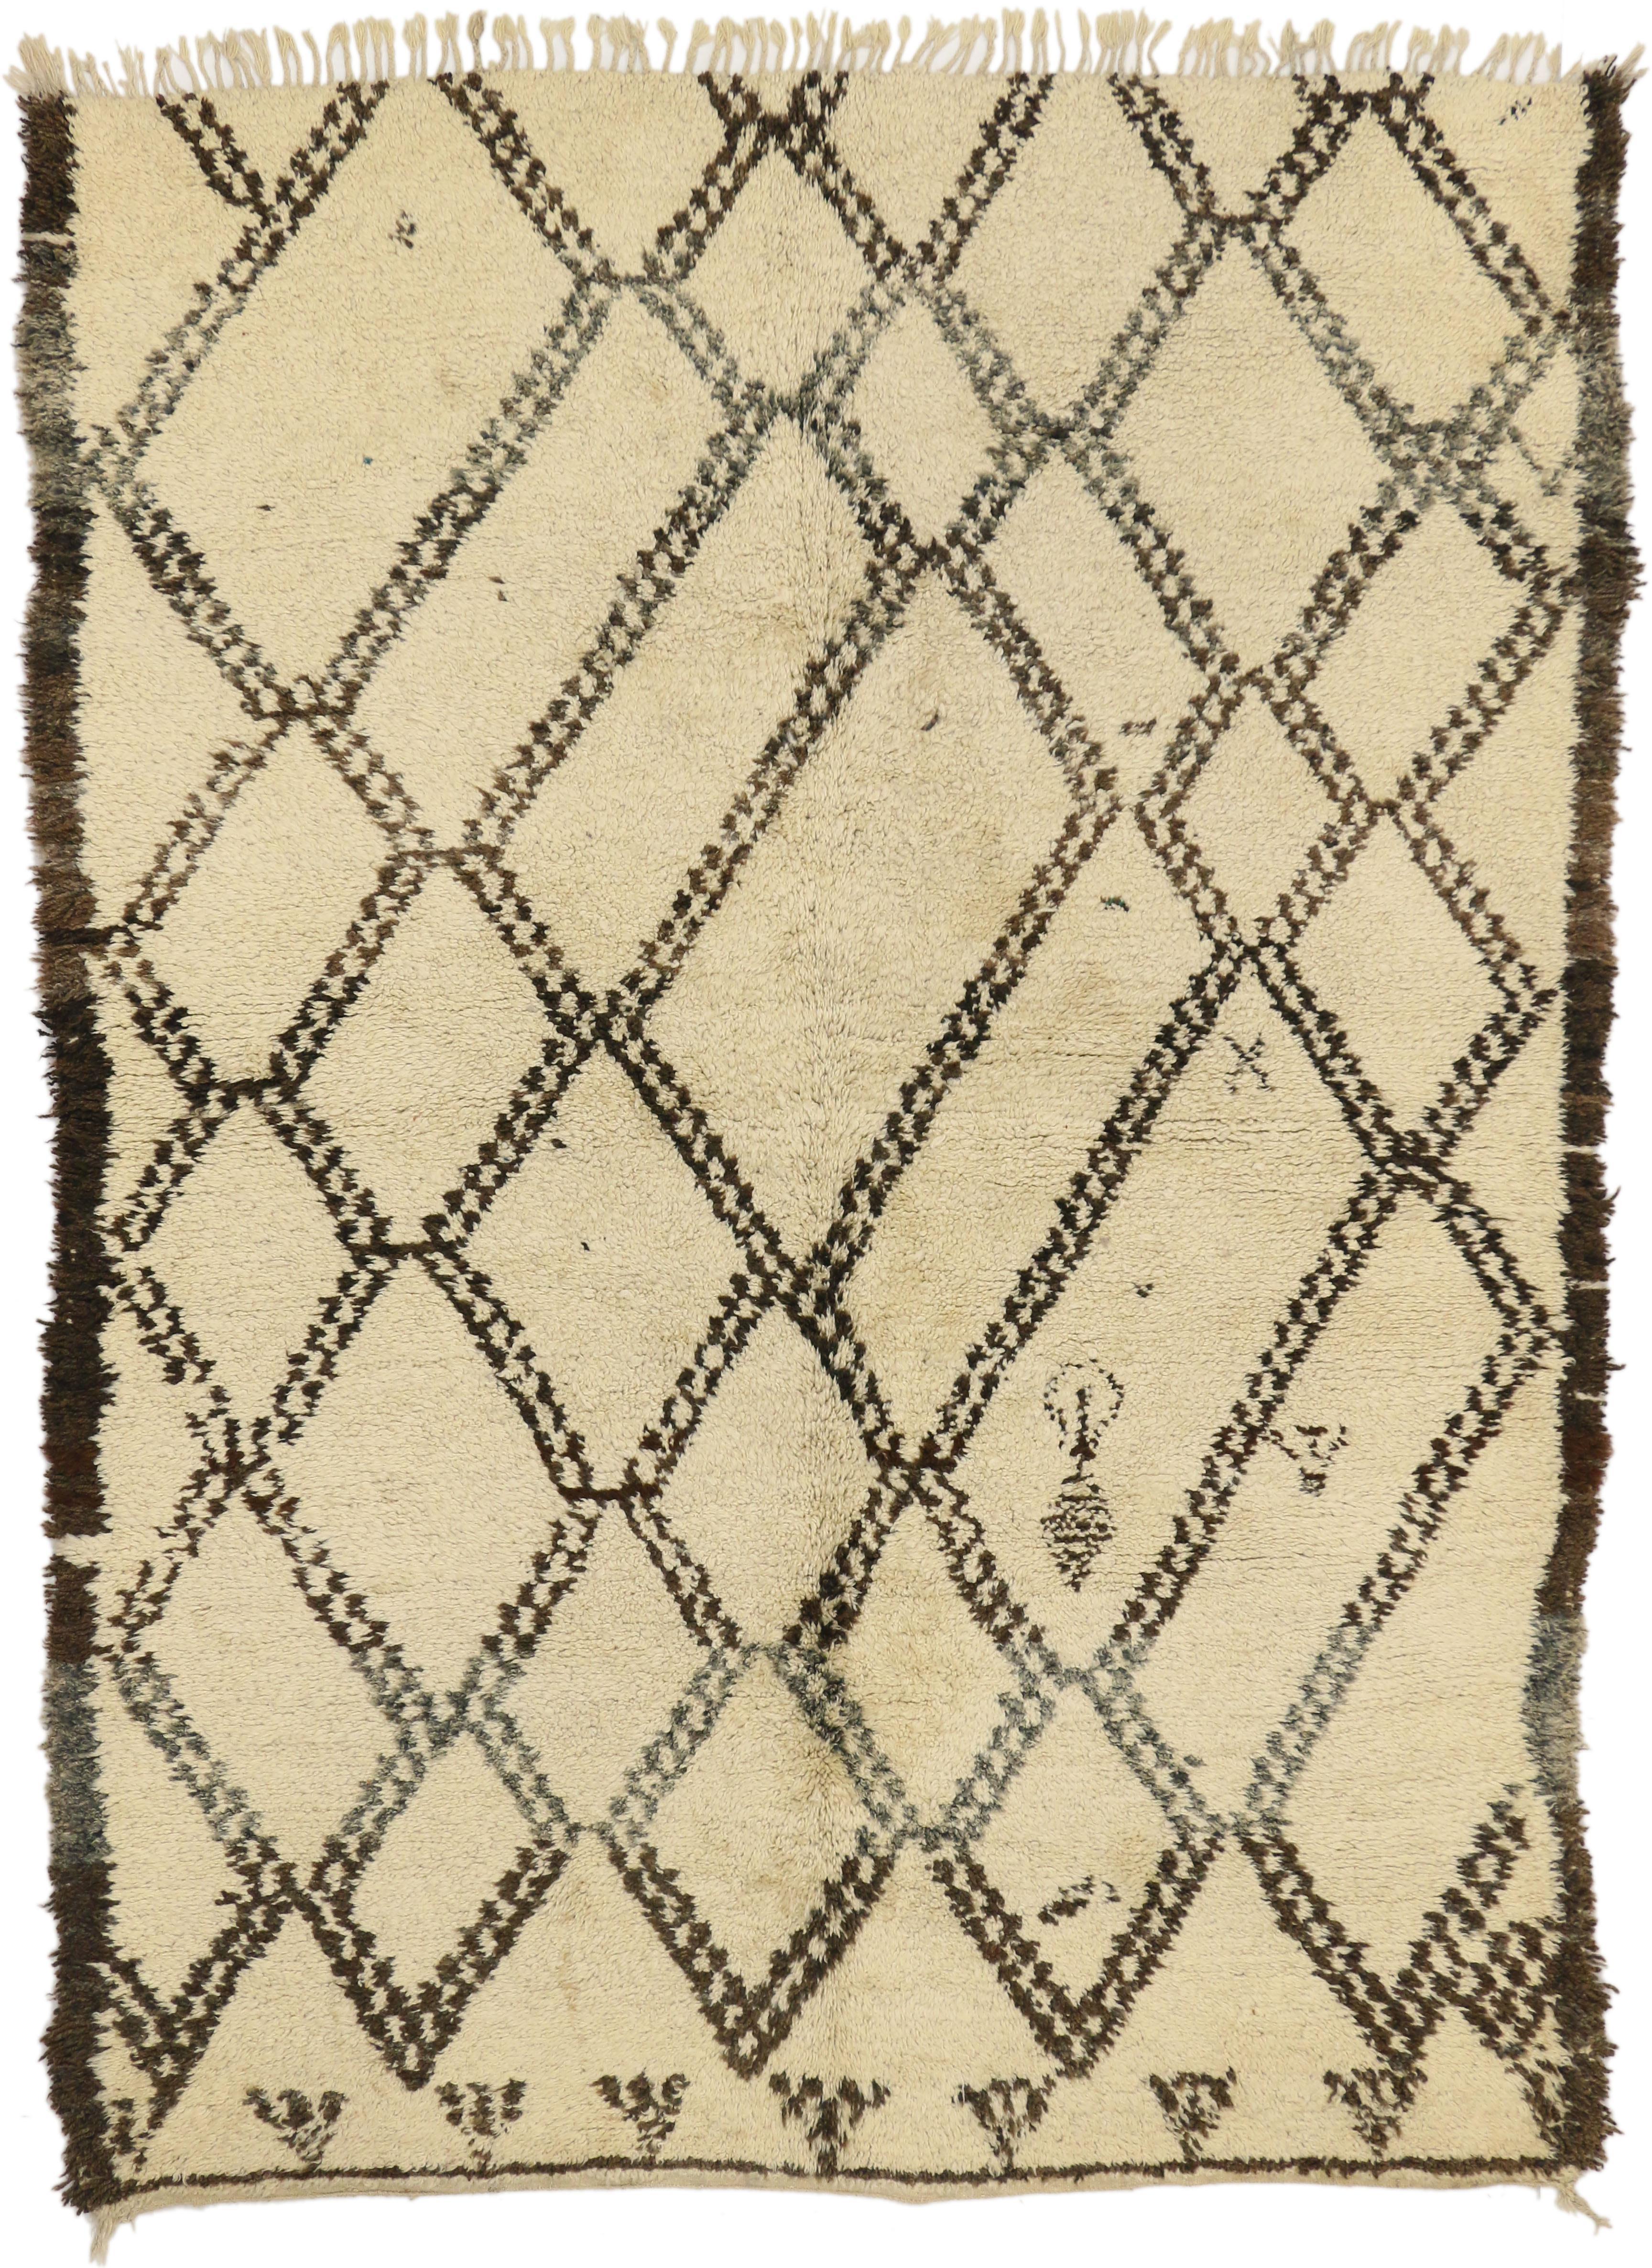 74730 A vintage Beni Ourain Moroccan rug. Rugs of the Beni Ourain tribe, one of the seventeen tribes of the Moroccan Berbers, exhibit simple yet classic designs on a neutral background. This vintage Moroccan Beni Ourain rug is patterned with a